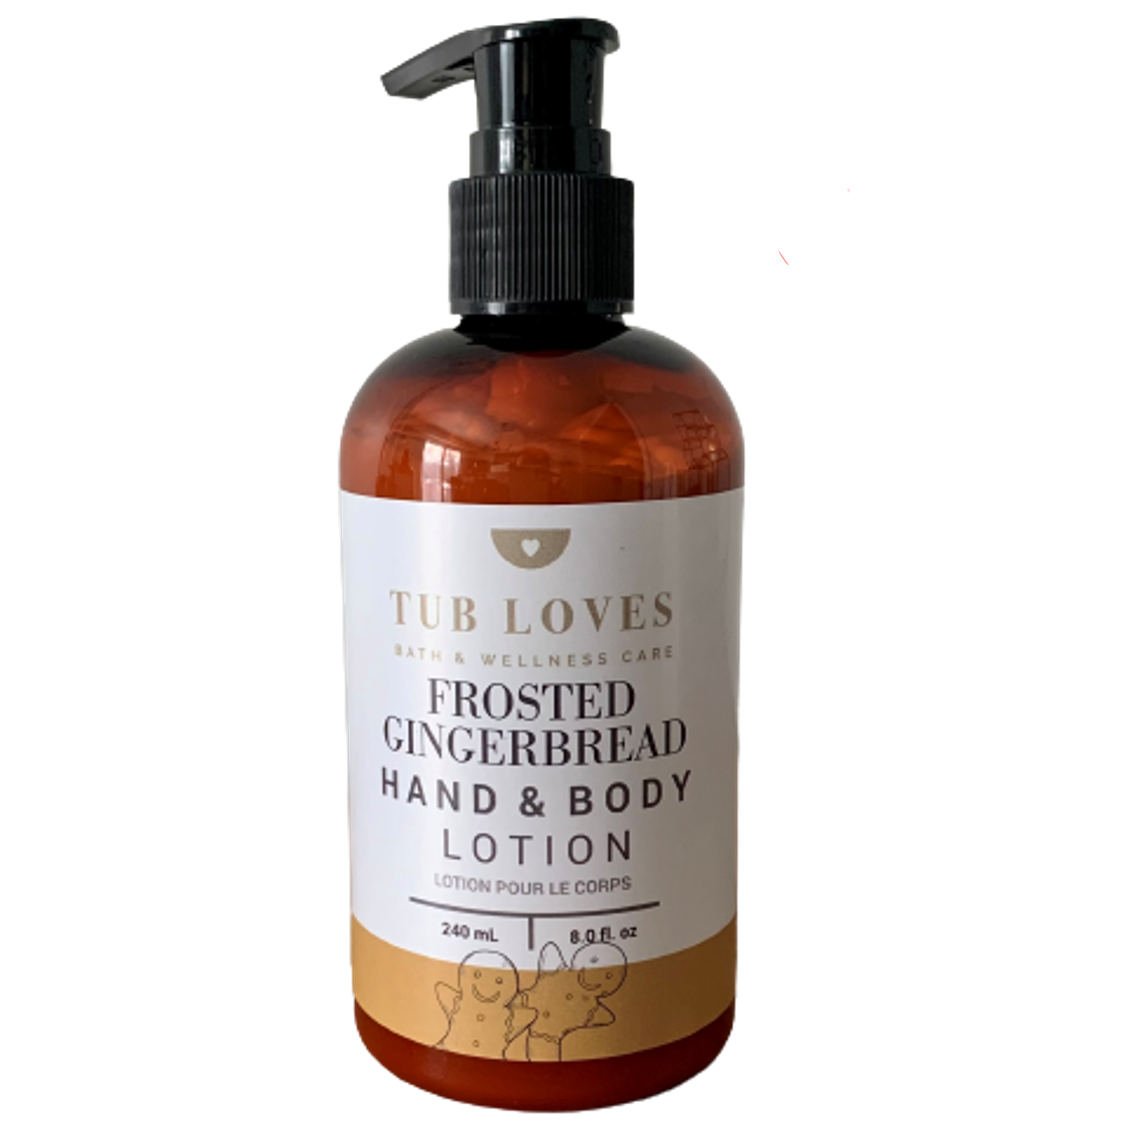 Frosted Gingerbread - Hand & Body Lotion